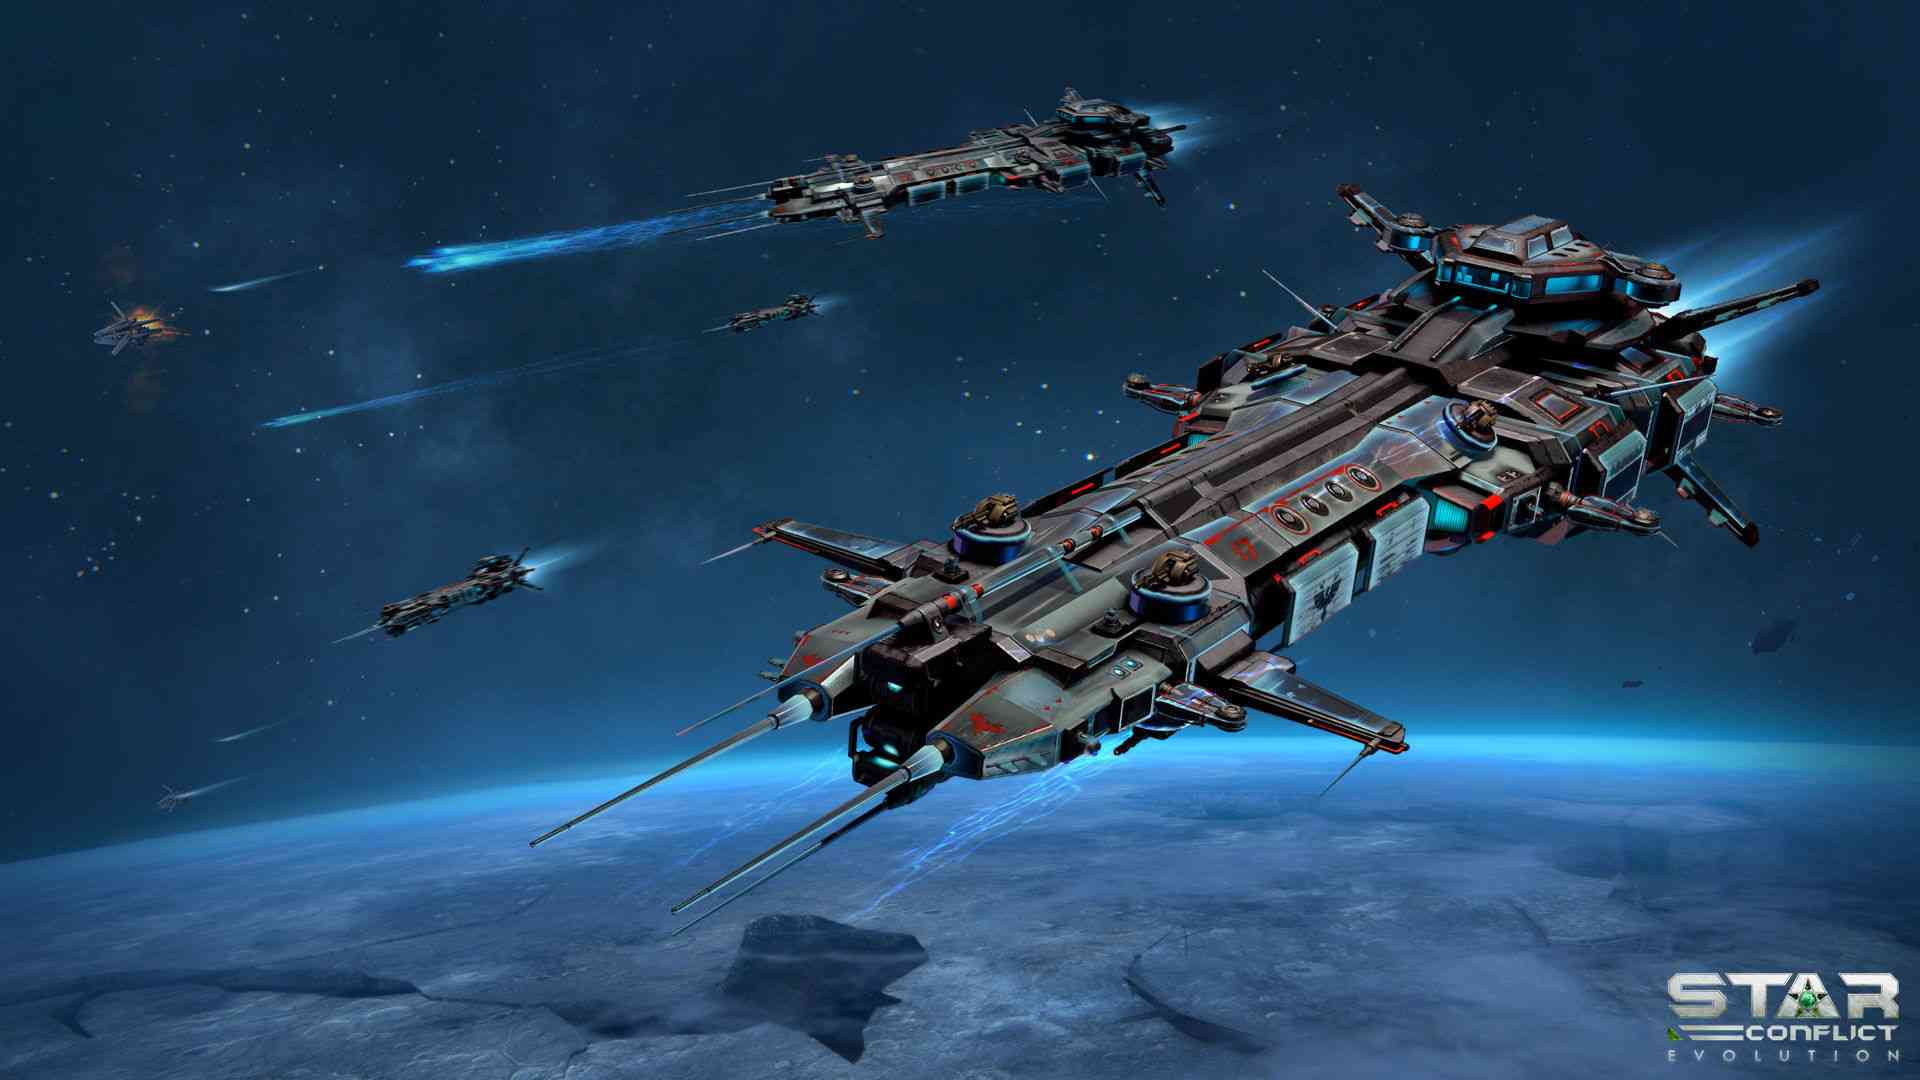 star conflicts update 1 5 9 adds new ships game modes and increases rewards 746 big 1